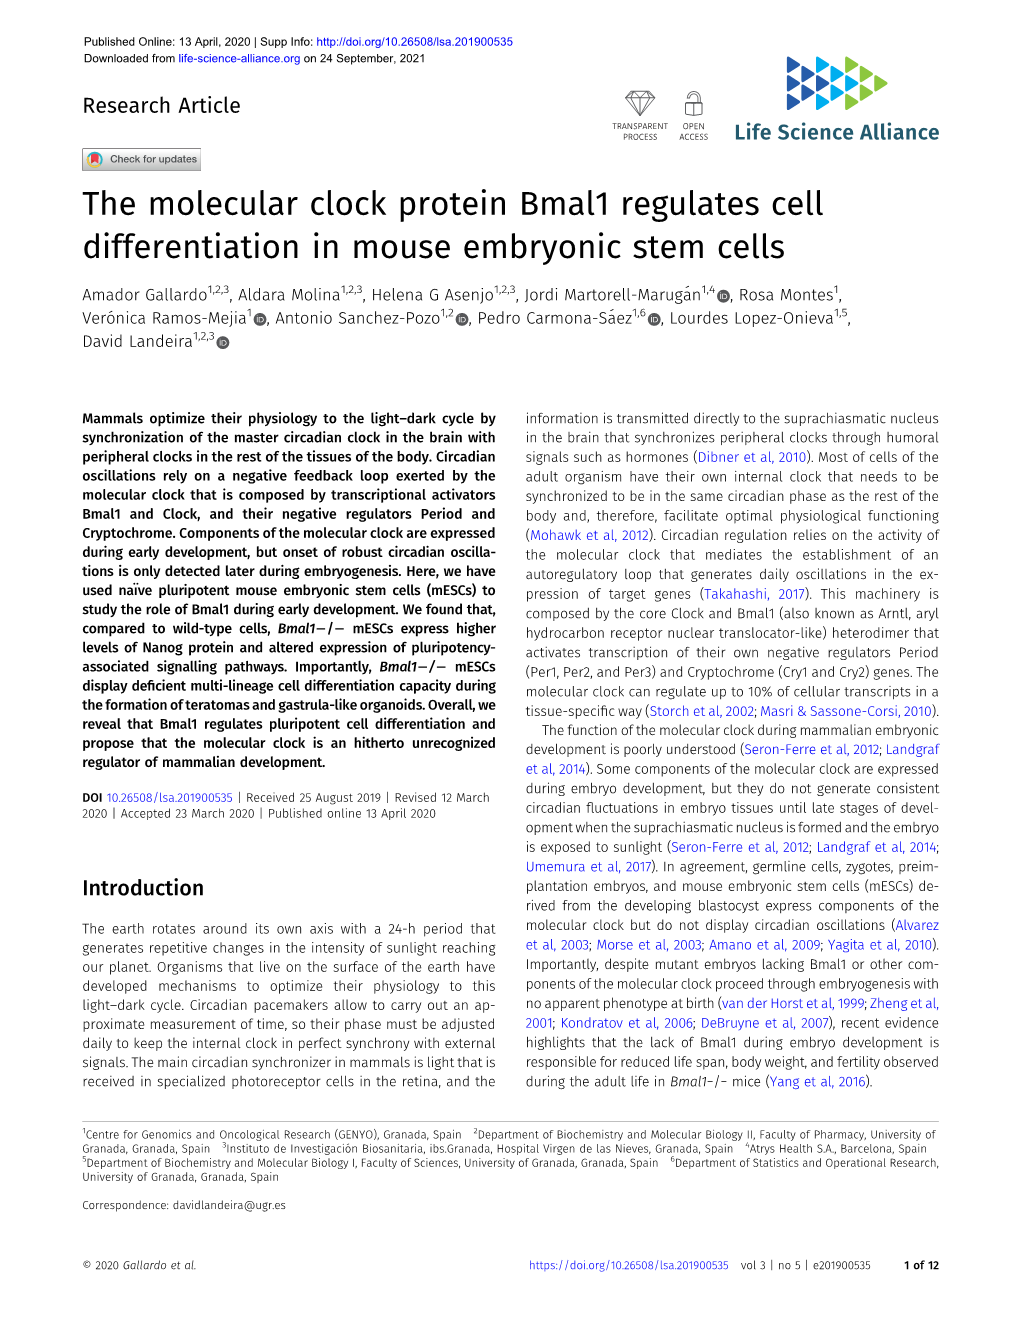 The Molecular Clock Protein Bmal1 Regulates Cell Differentiation in Mouse Embryonic Stem Cells